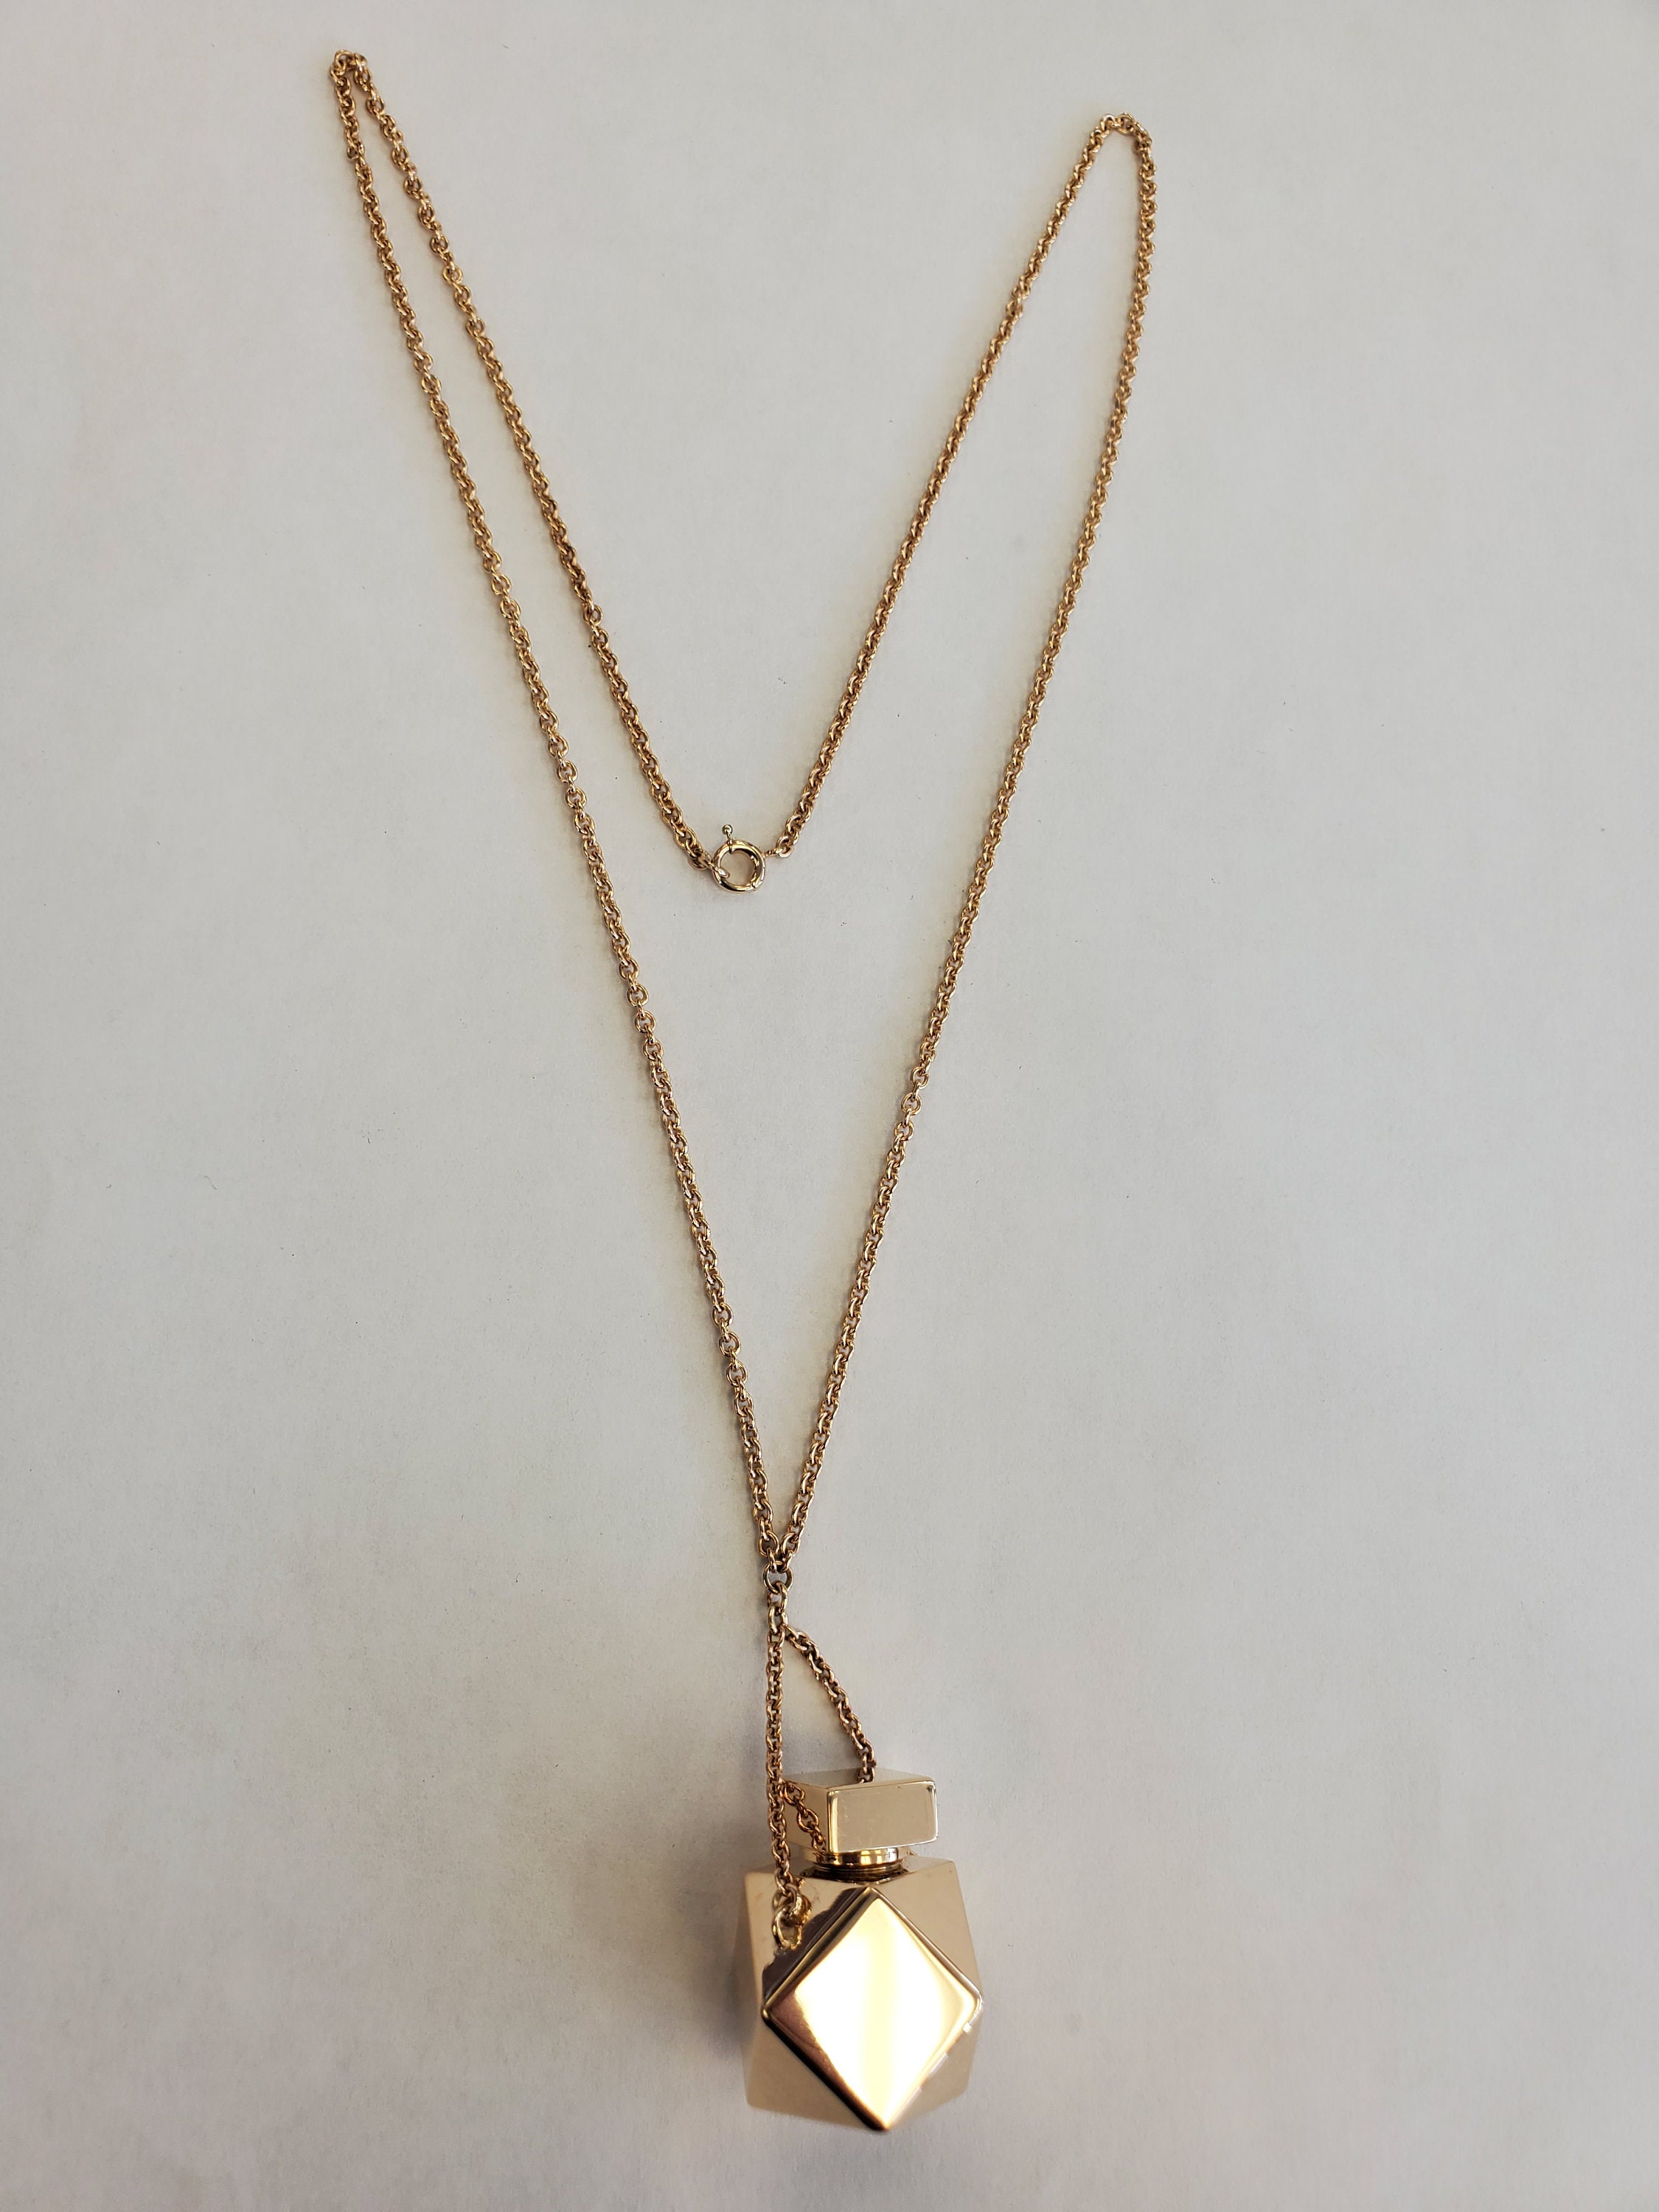 Product Image for Geometric Perfume Pendant Necklace with Dauber 14k Gold